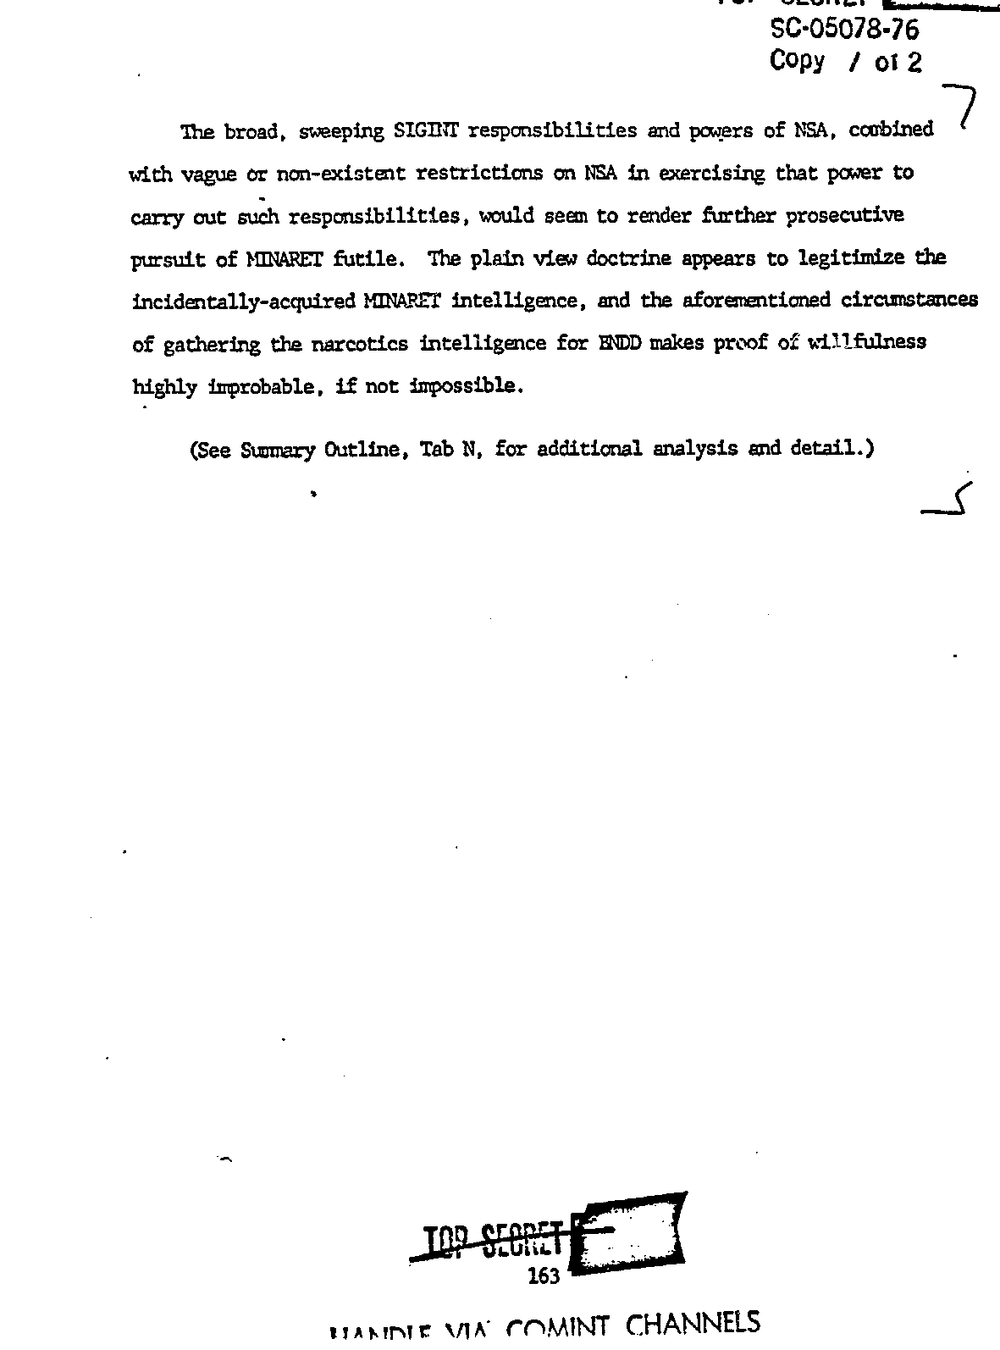 Page 171 from Report on Inquiry Into CIA Related Electronic Surveillance Activities